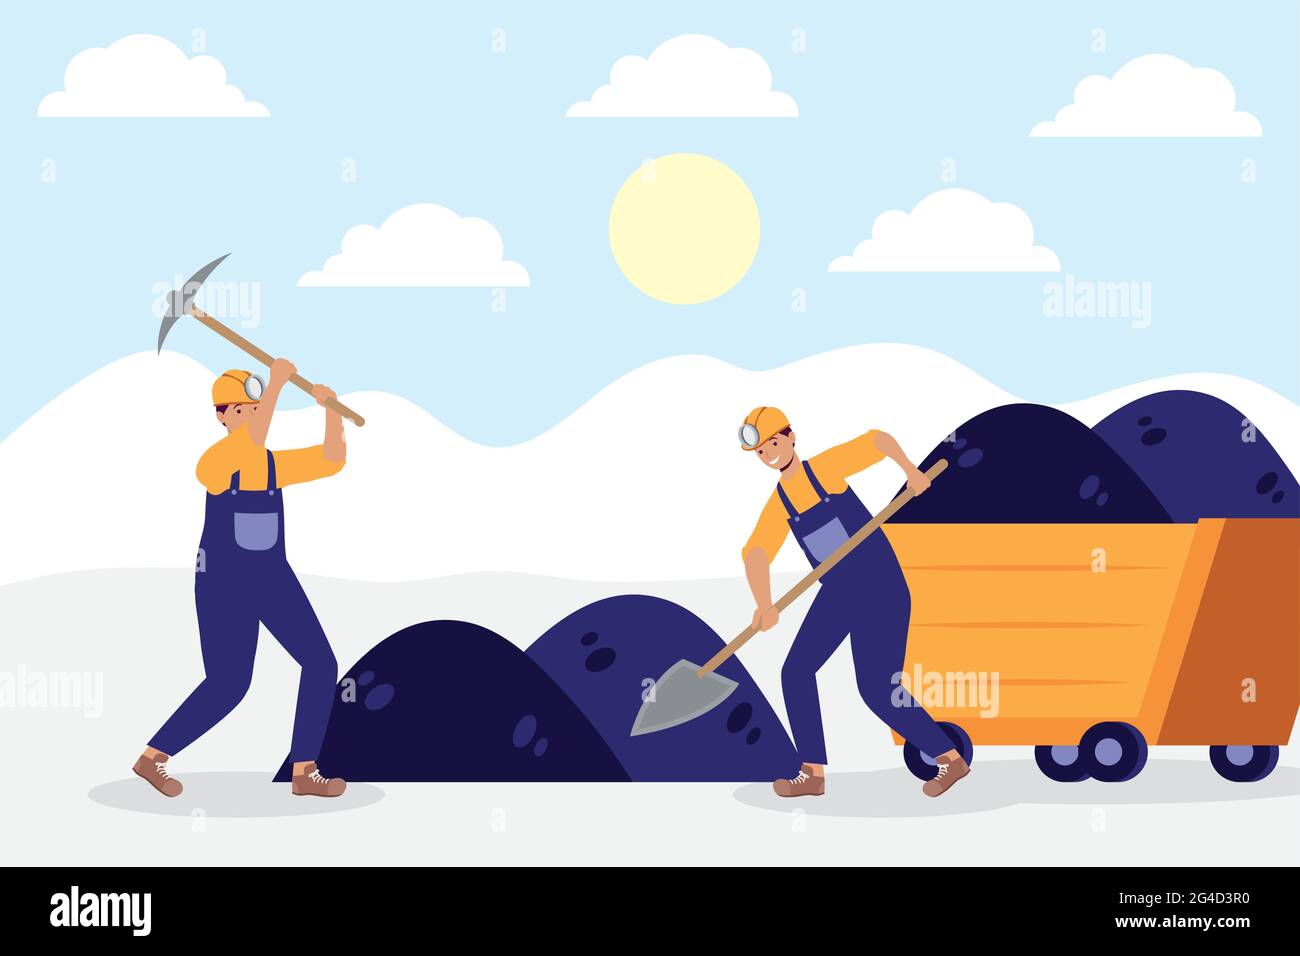 miners working in coal mine characters Stock Vector